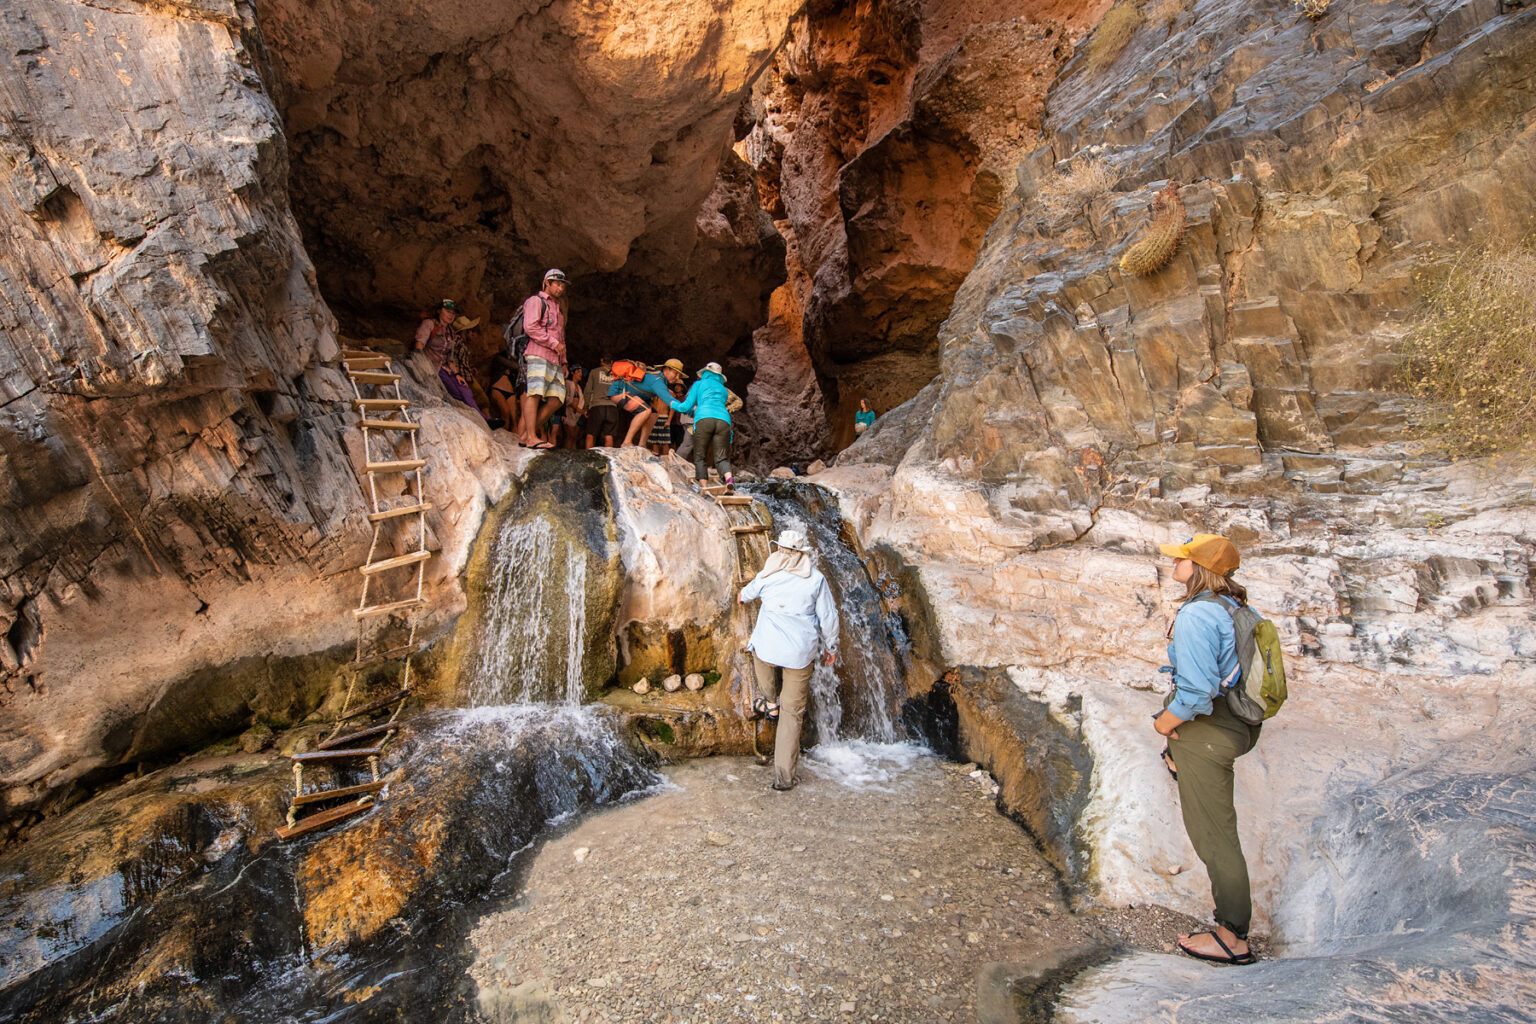 Guests ascend a wood and rope ladder up to a cool cave overlooking a small waterfall in Grand Canyon